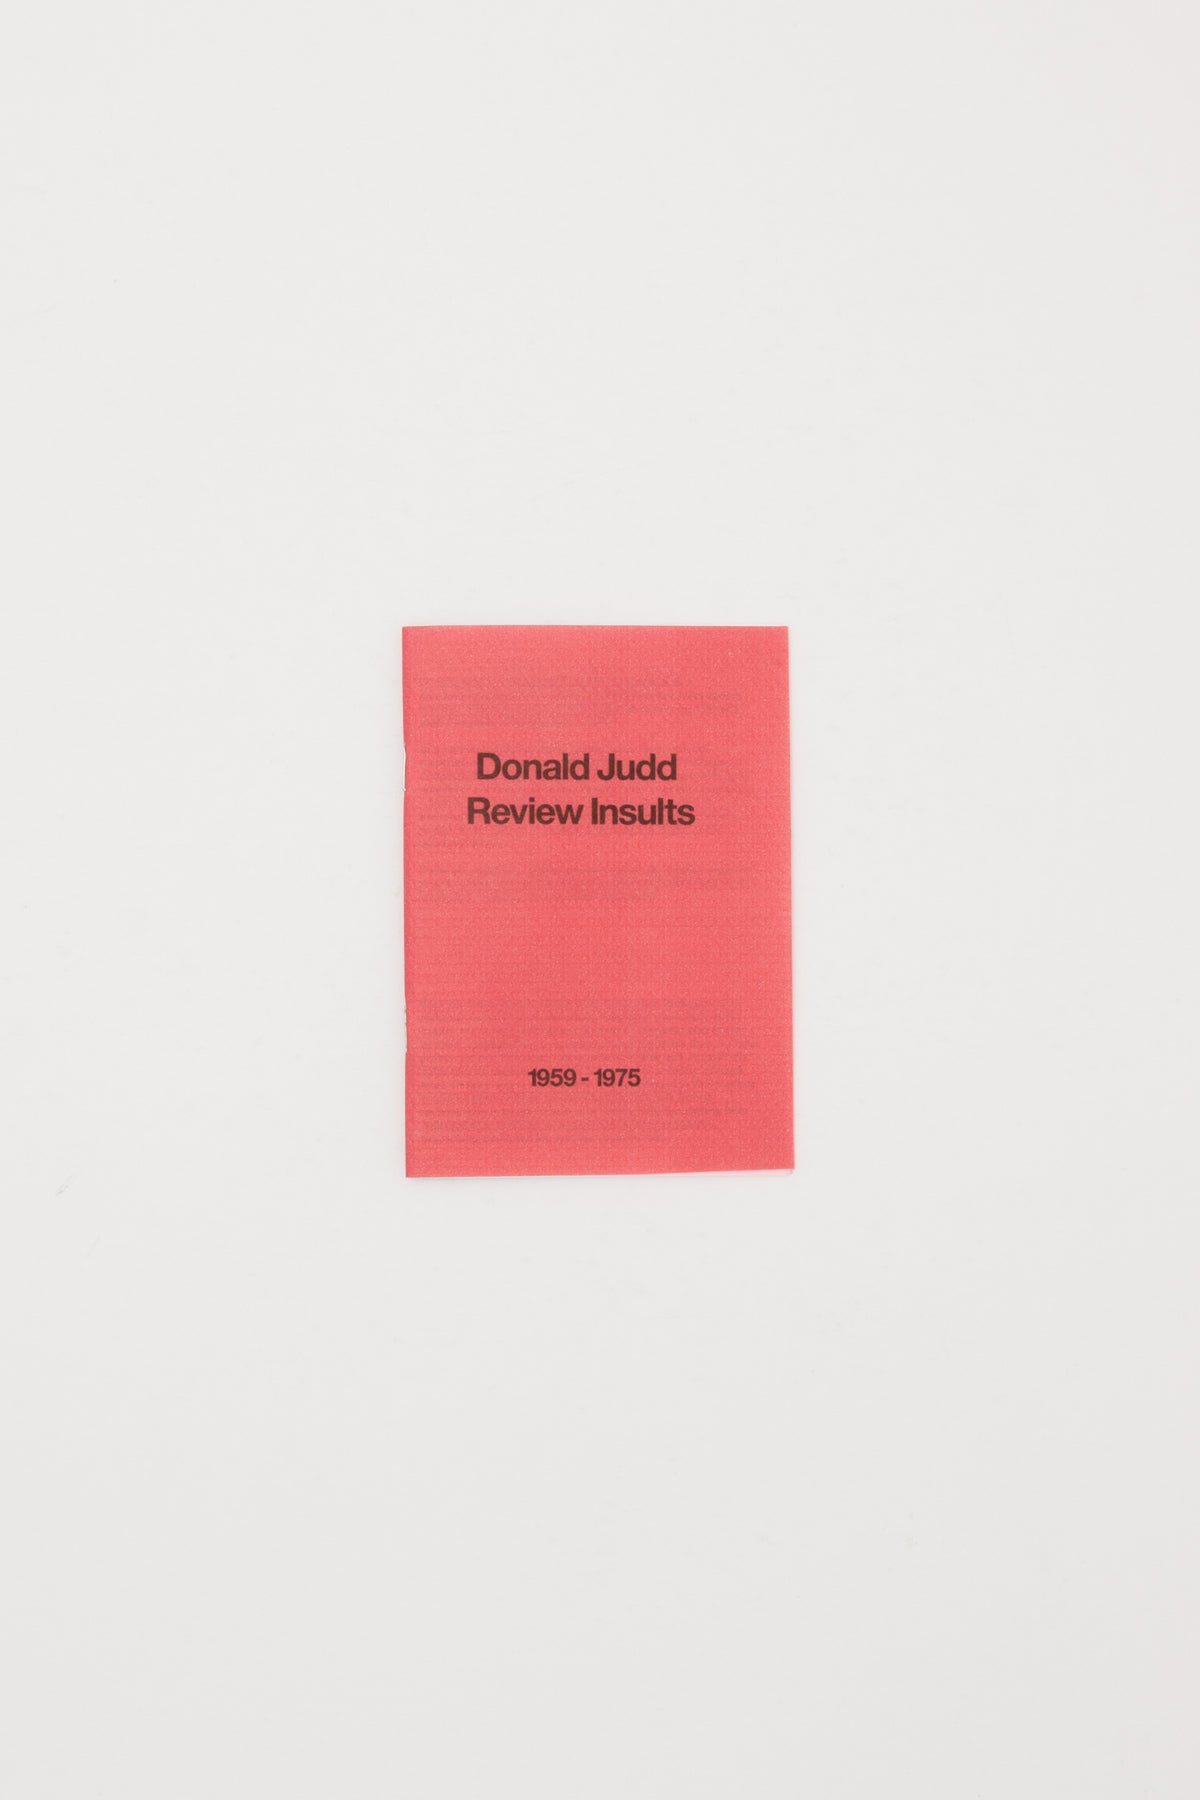 DONALD JUDD REVIEW INSULTS 1959-1975 - Michael Crowe